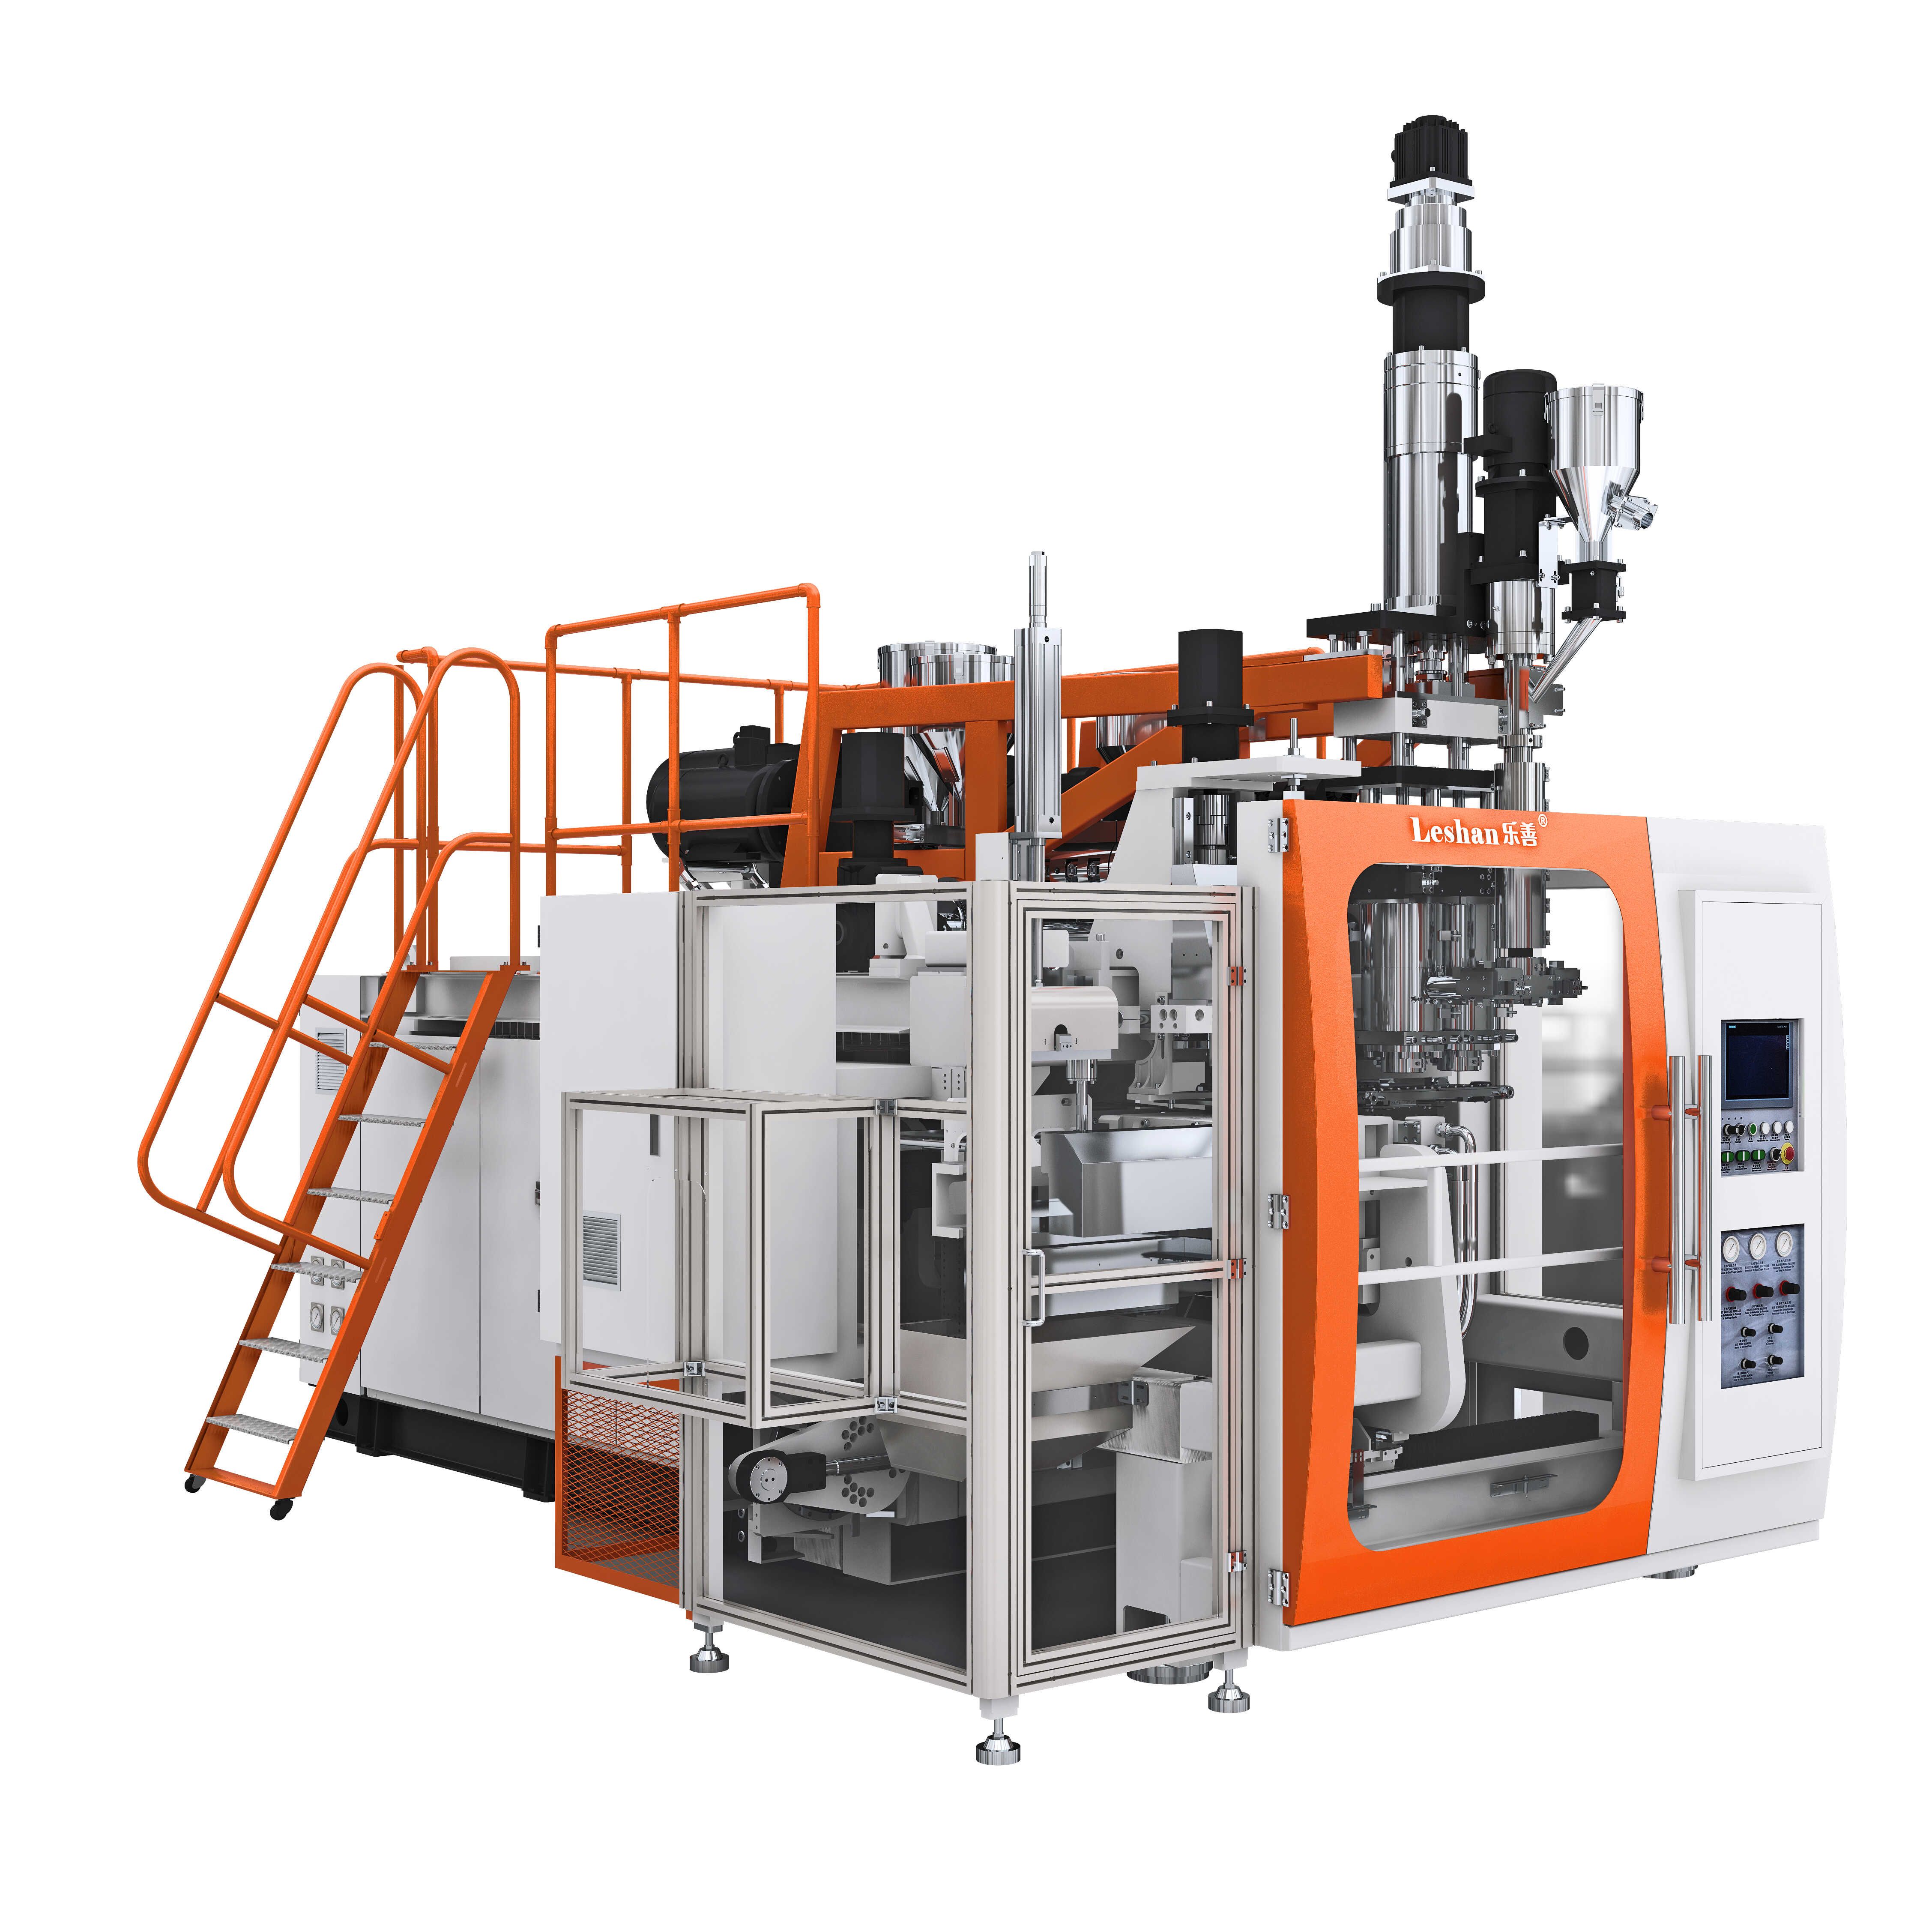 How do 2-stage blow molding machines manufacturers control variables like temperature, pressure, and blow time in the blow molding process to ensure consistent product quality?